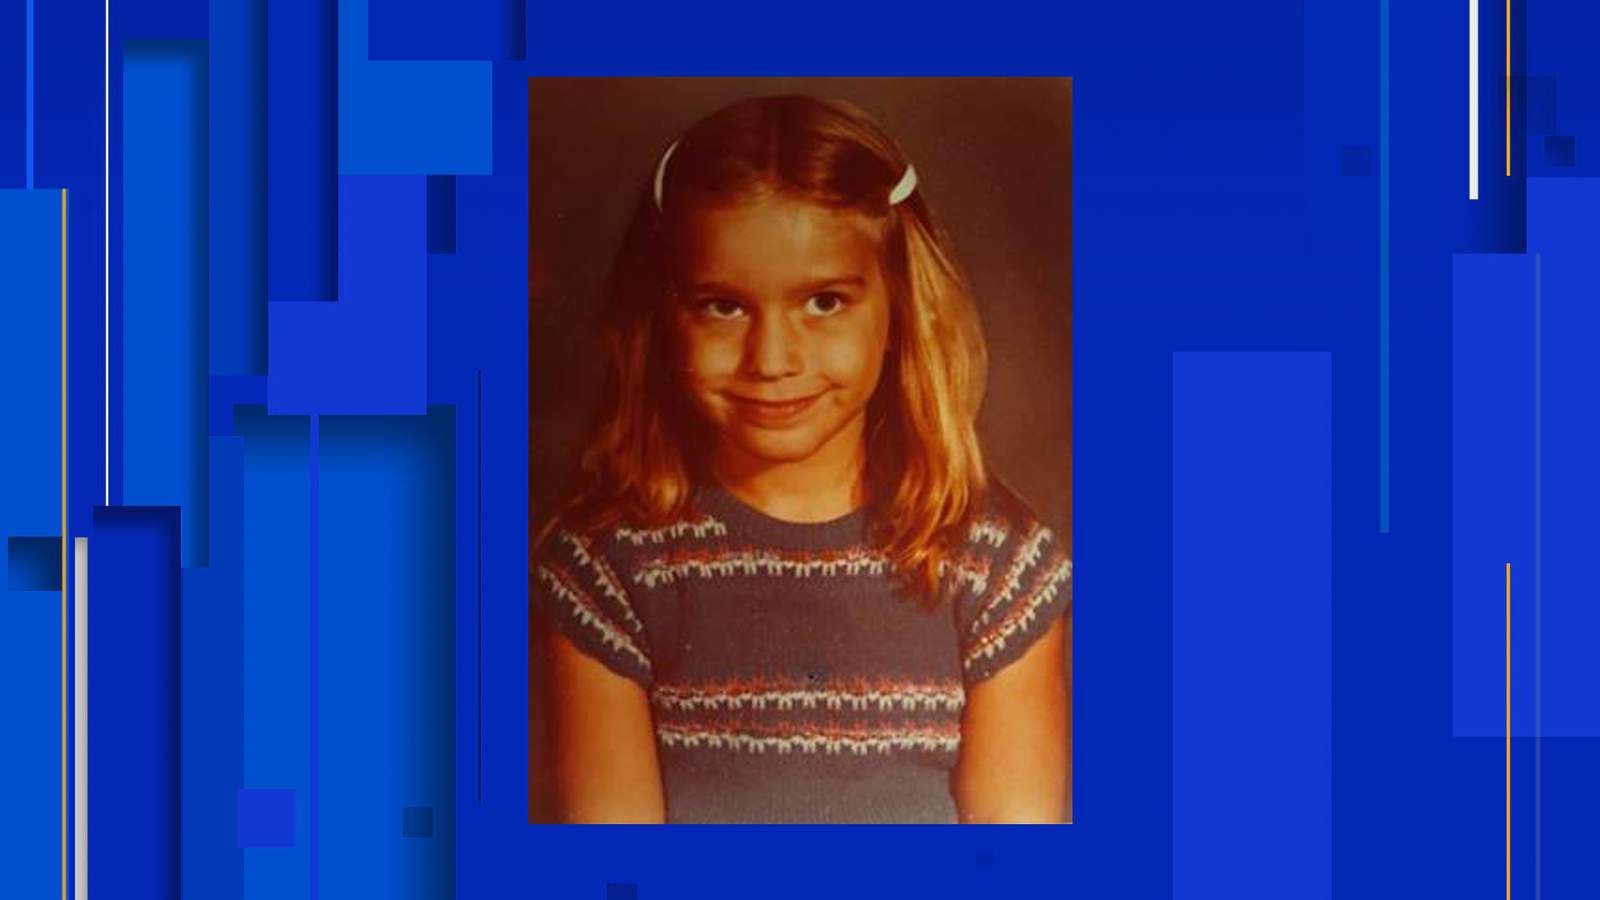 Texas Department of Public Safety asking for public’s help in solving 1979 homicide of 7-year-old girl